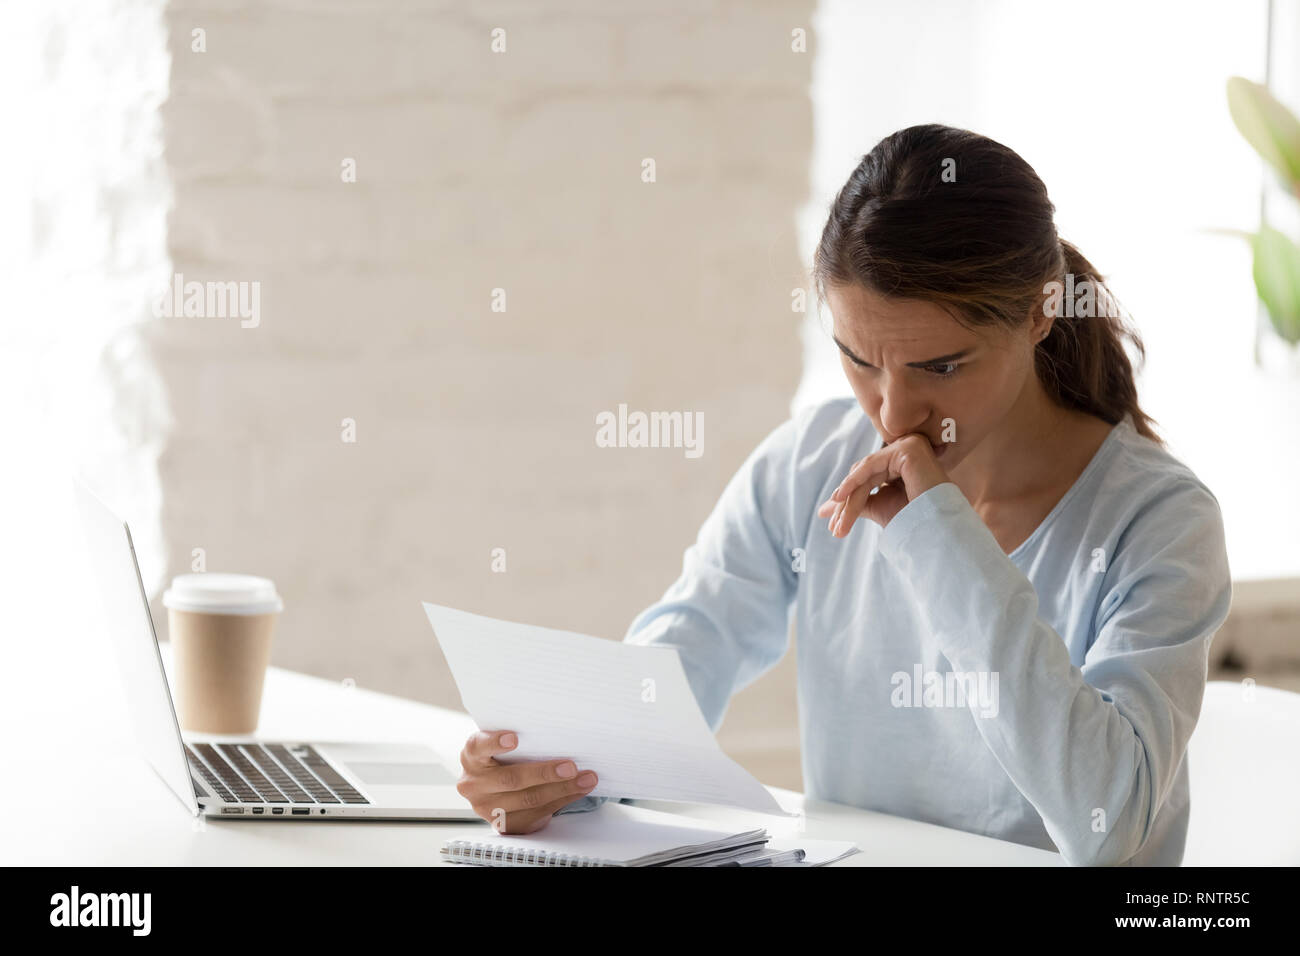 Frustrated young woman sitting at table reading letter Stock Photo